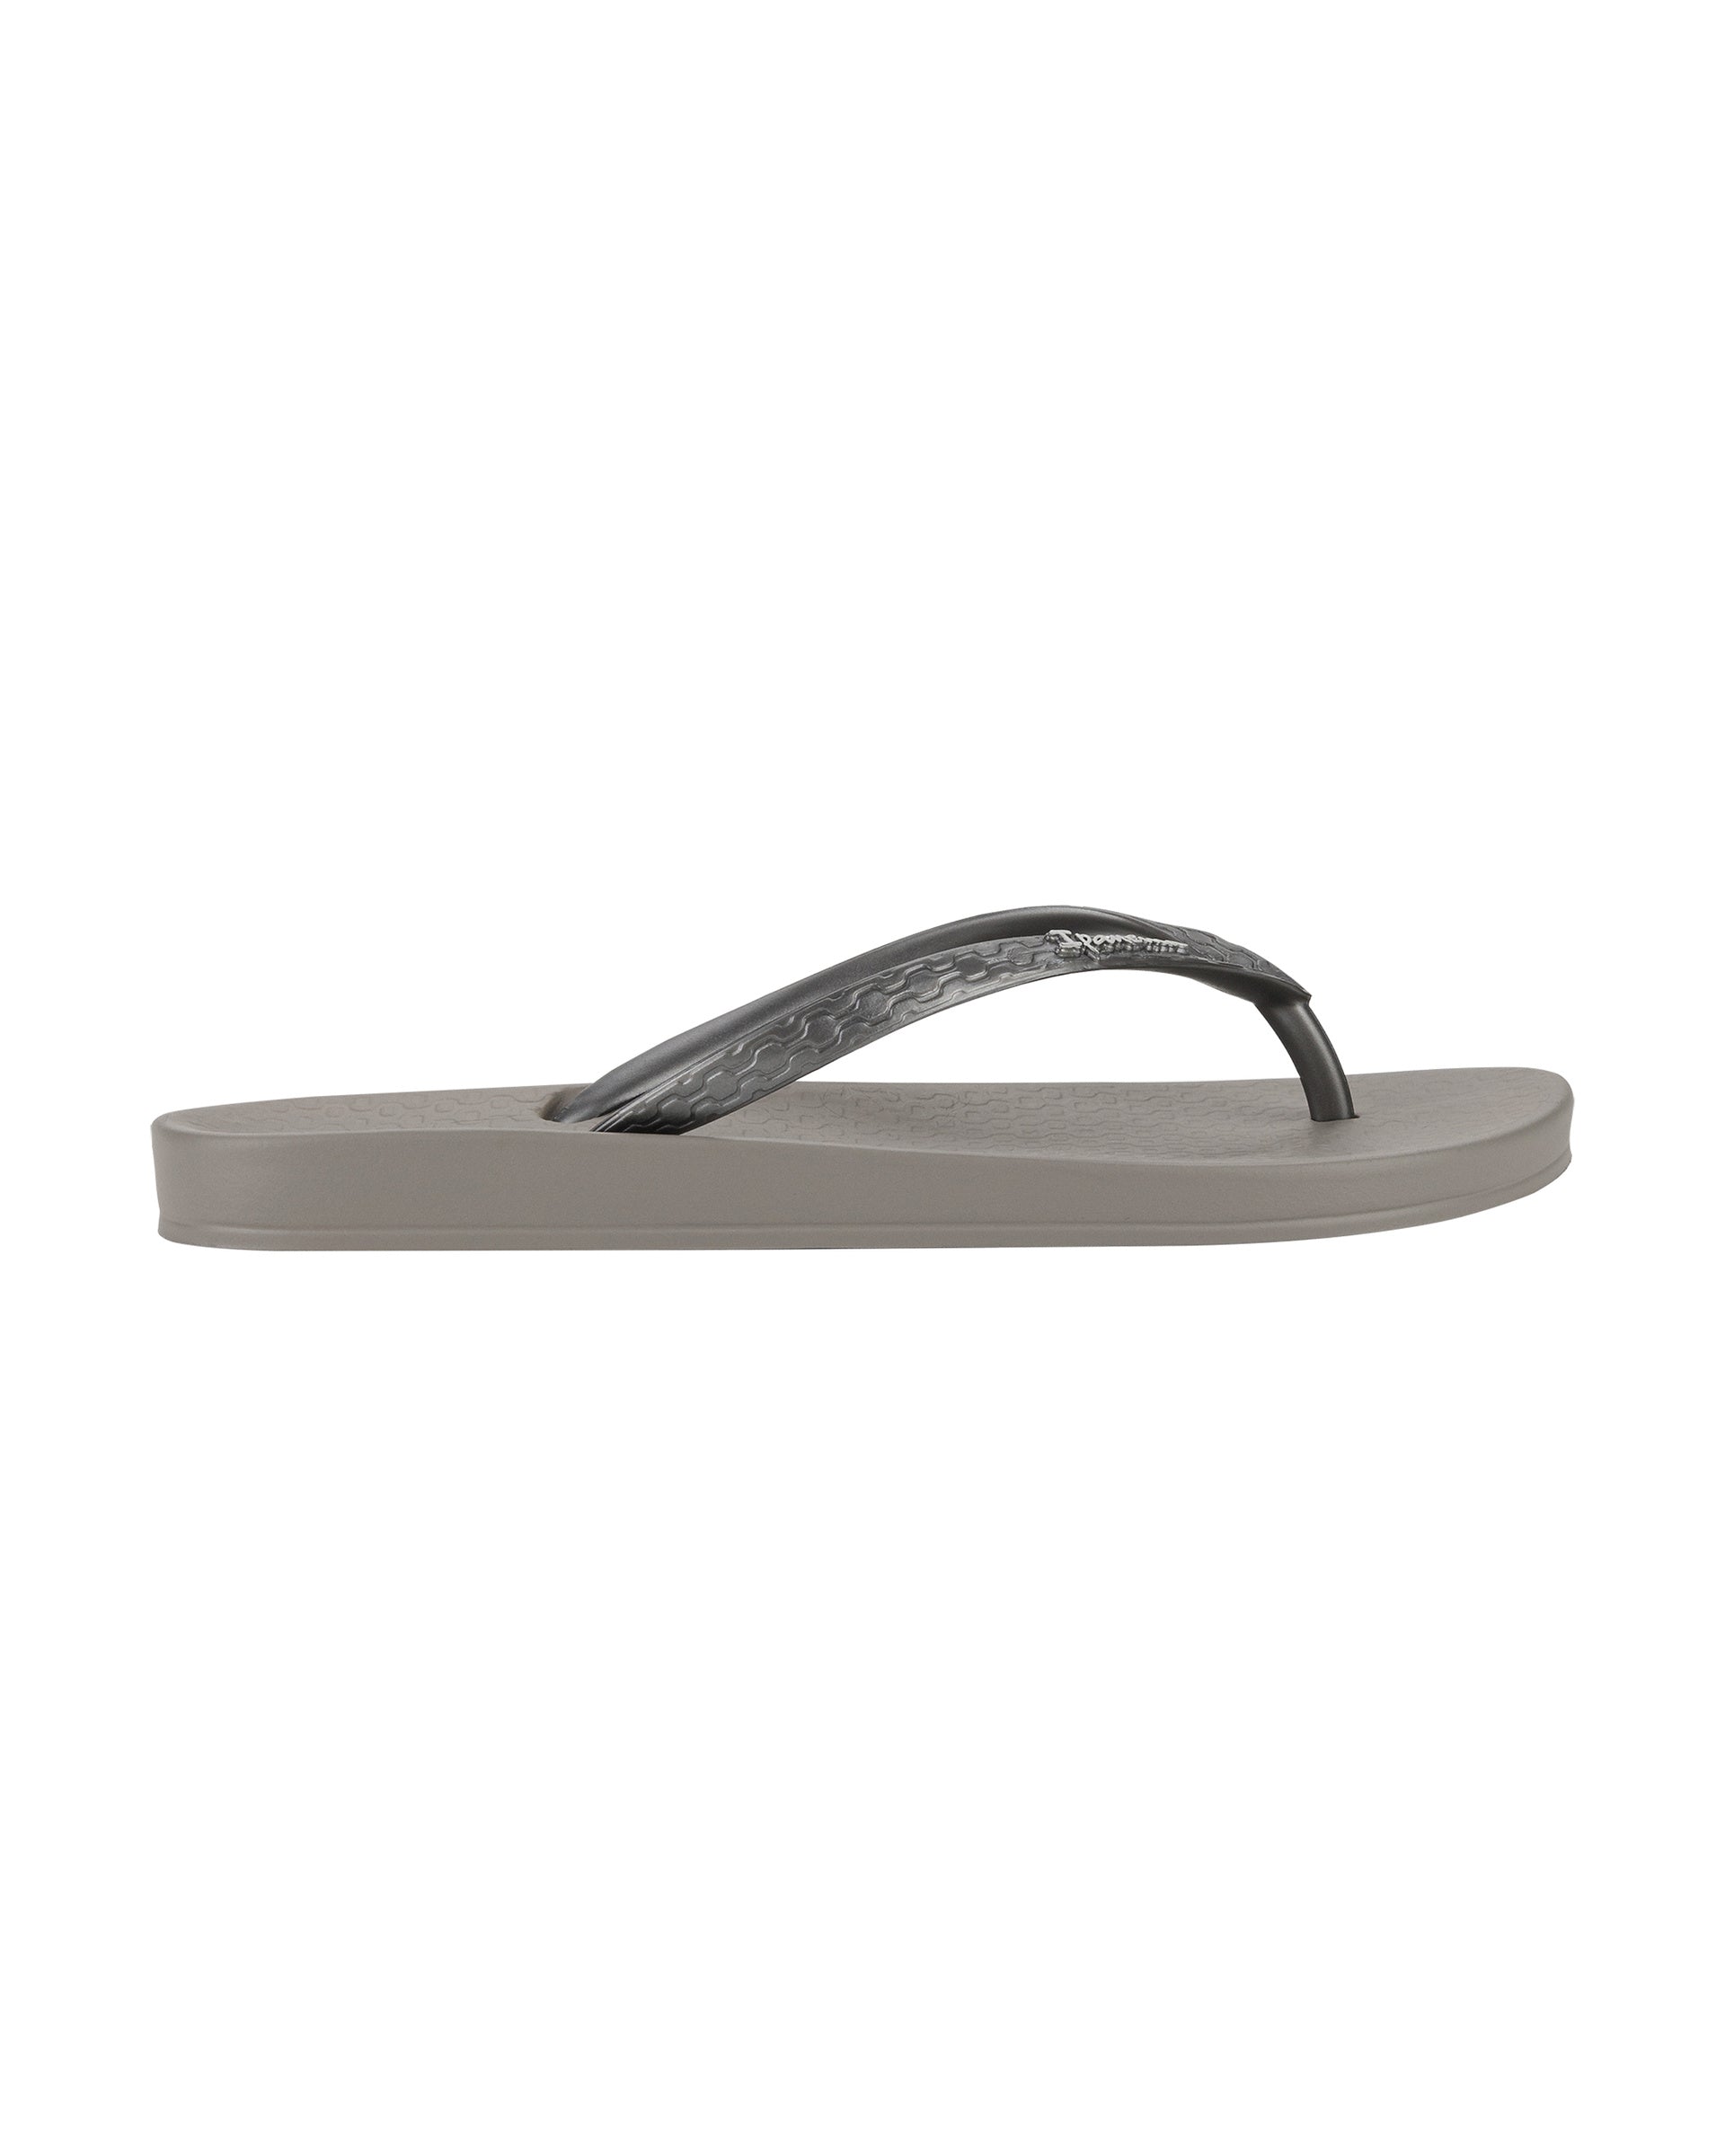 Outer side view of a grey Ipanema Ana Tan women's flip flop.